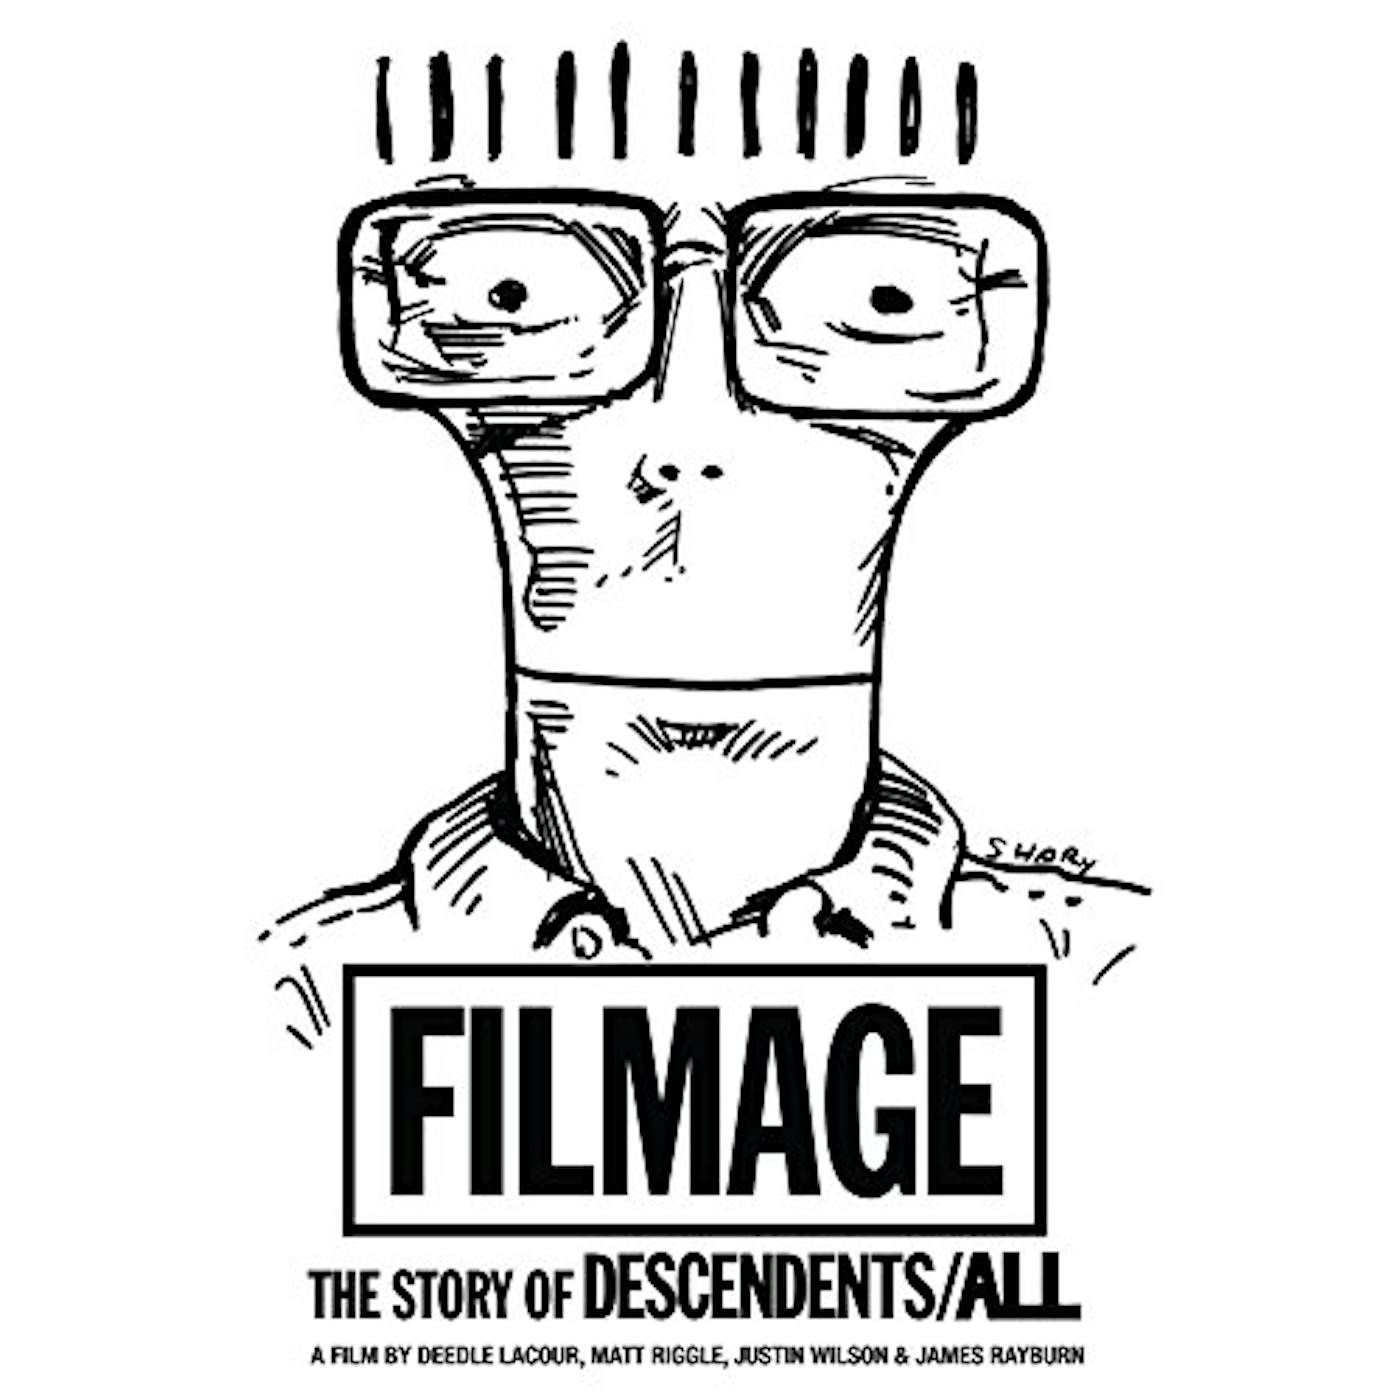 FILMAGE: THE STORY OF DESCENDENTS / ALL Blu-ray